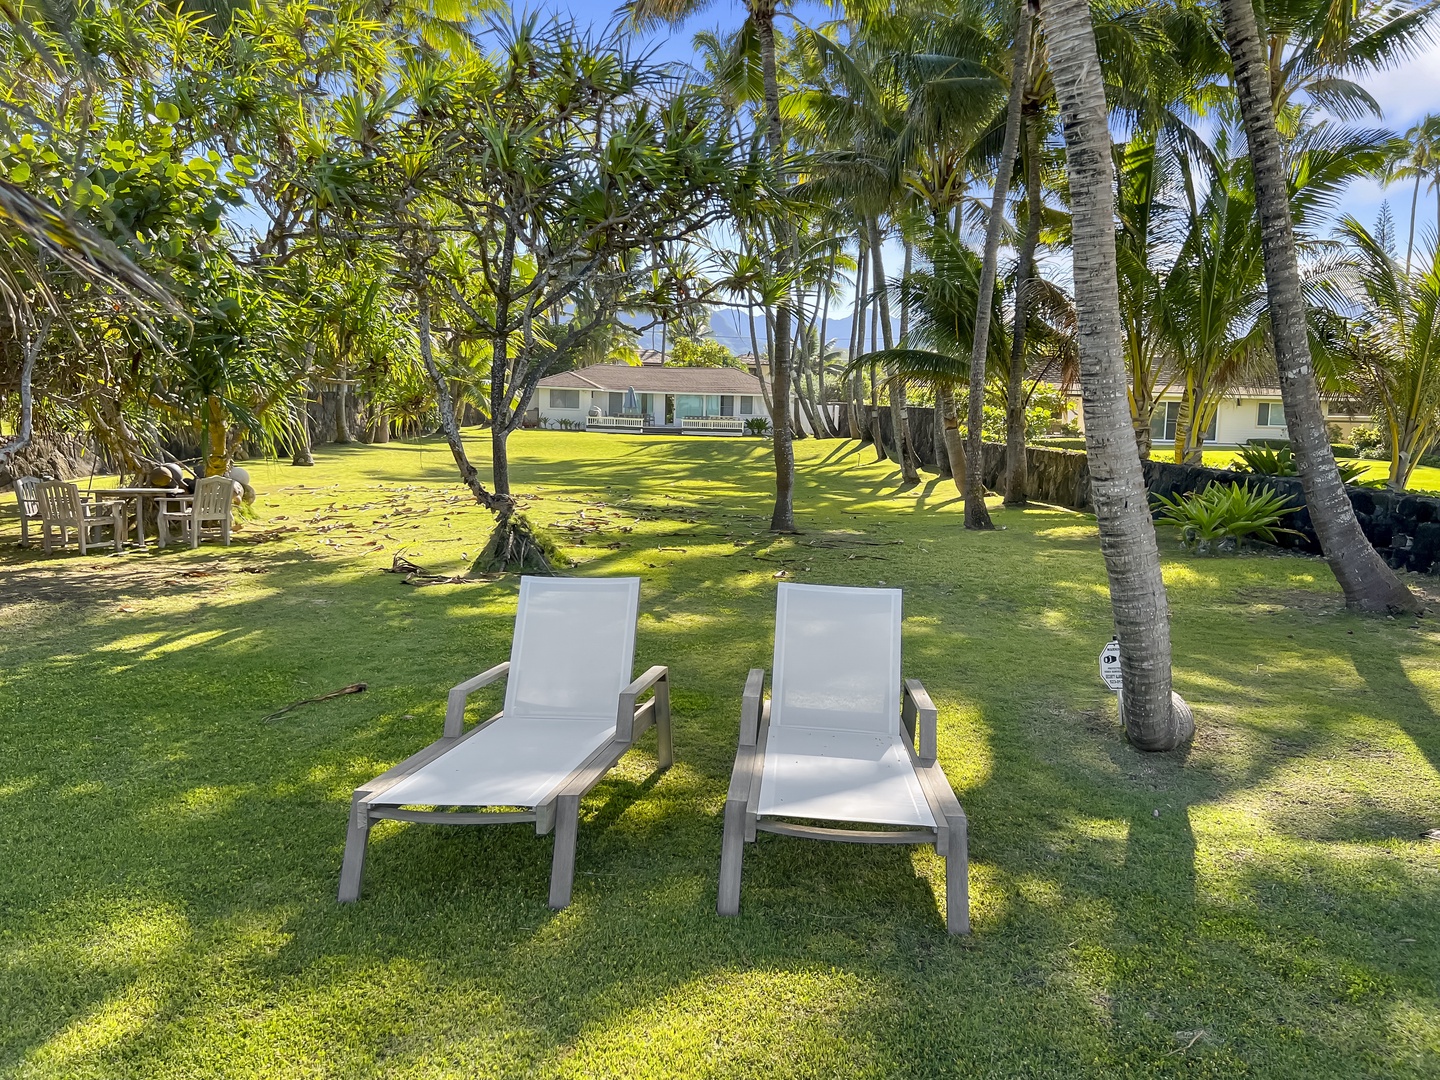 Kailua Vacation Rentals, Kai Mele - Comfortable beach chairs to enjoy the sun or the shade in your private garden